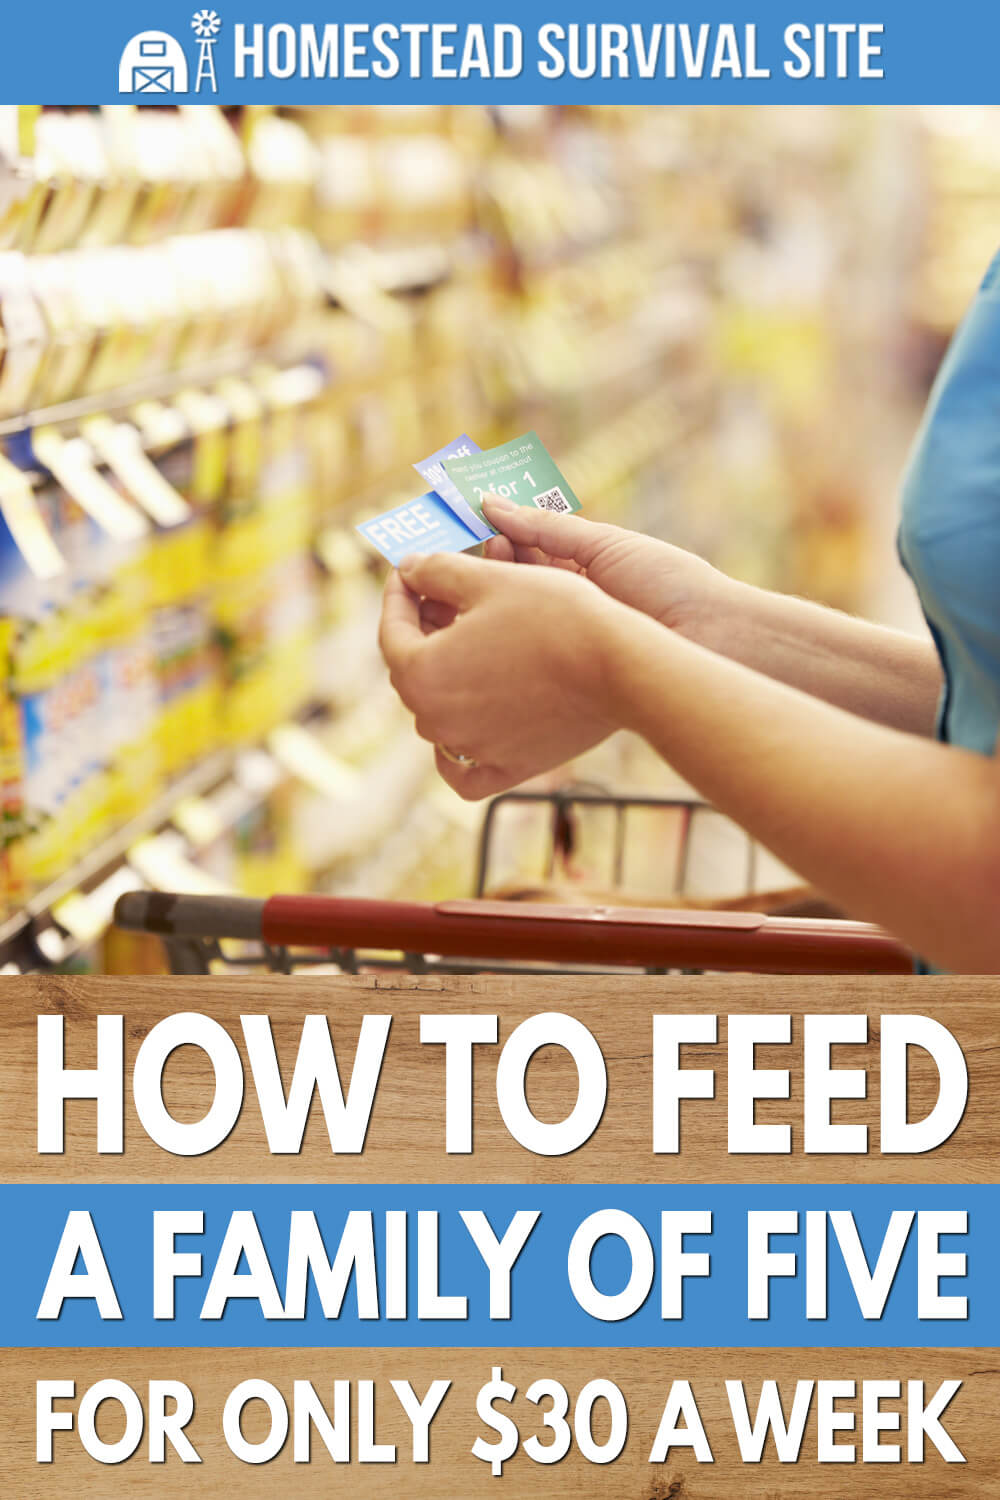 How to Feed a Family of Five for only $30 a Week